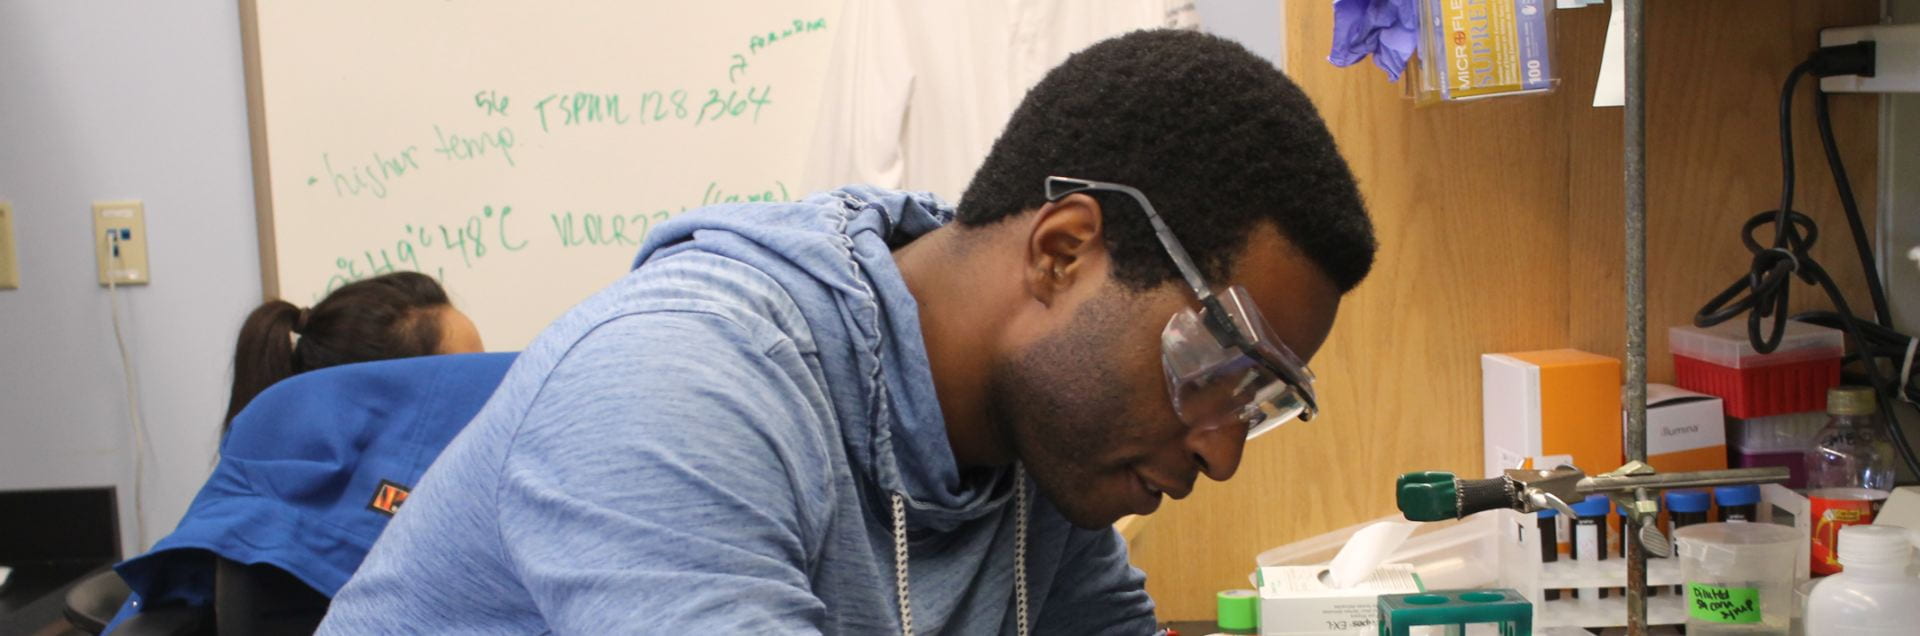 Student working on a lab